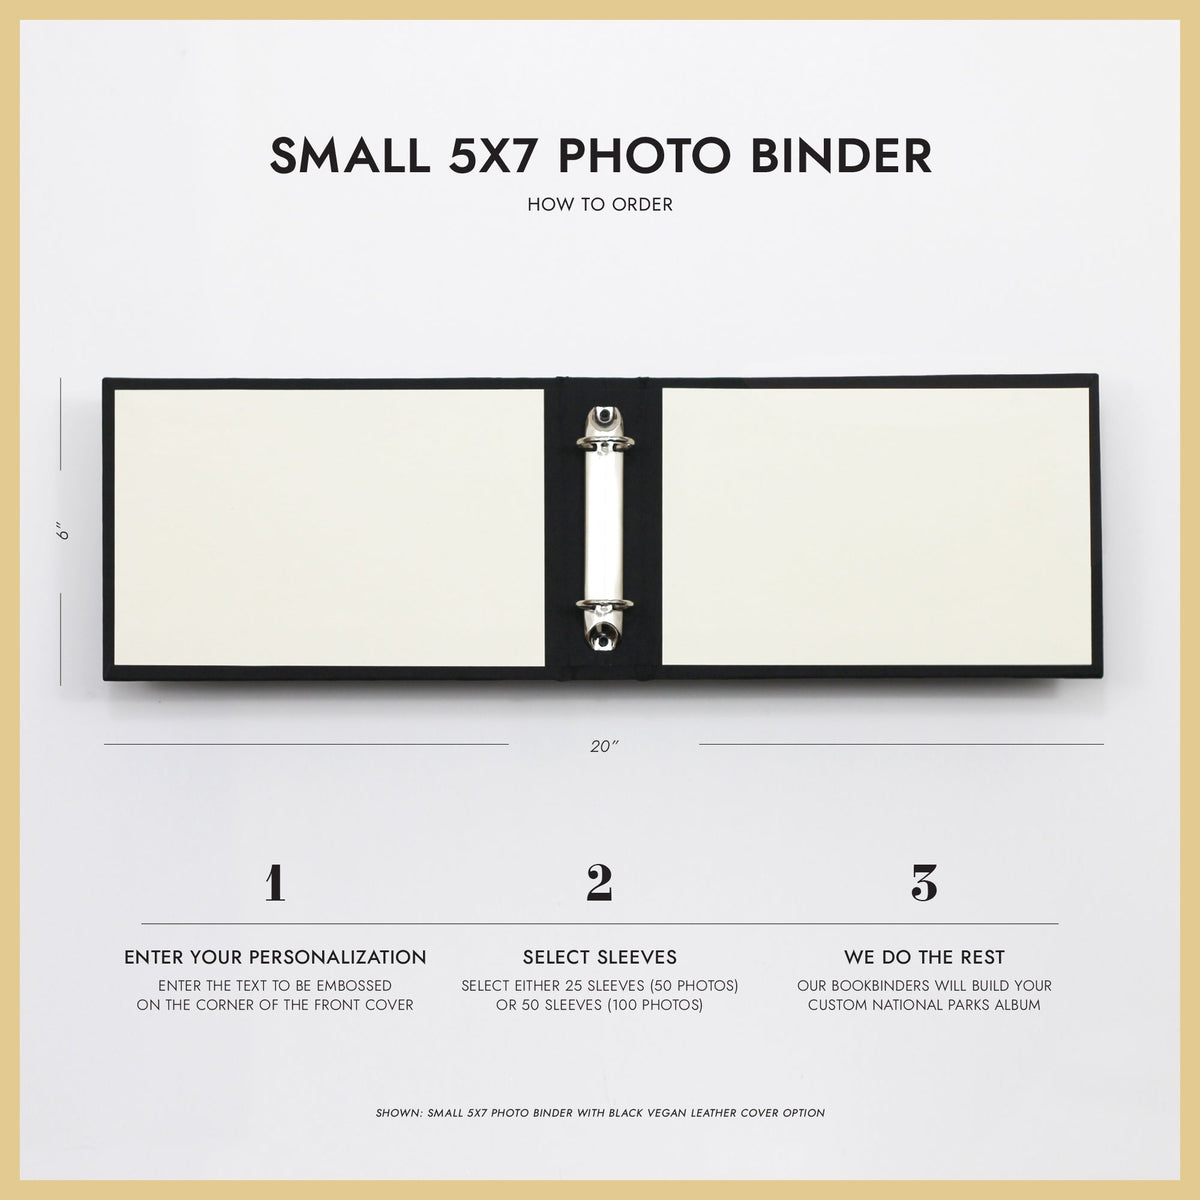 Small Photo Binder | for 5x7 Photos | with Black Vegan Leather Cover